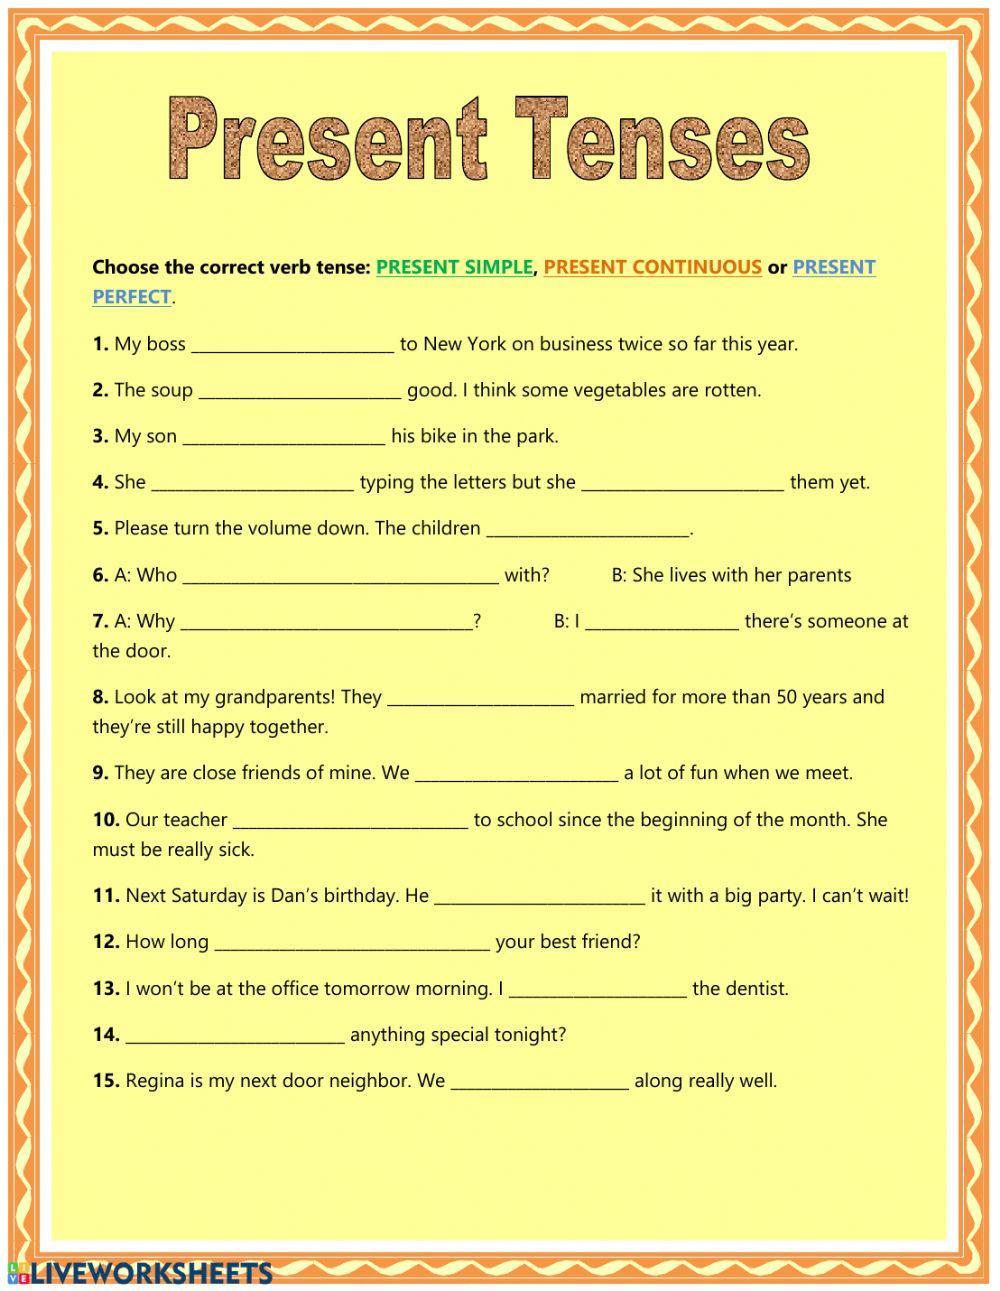 Present perfect tense exercise. Present perfect simple for Tenses. Mixed Tenses exercises Intermediate упражнения. Past perfect and past simple Tenses exercise. Present perfect simple Tense exercise.